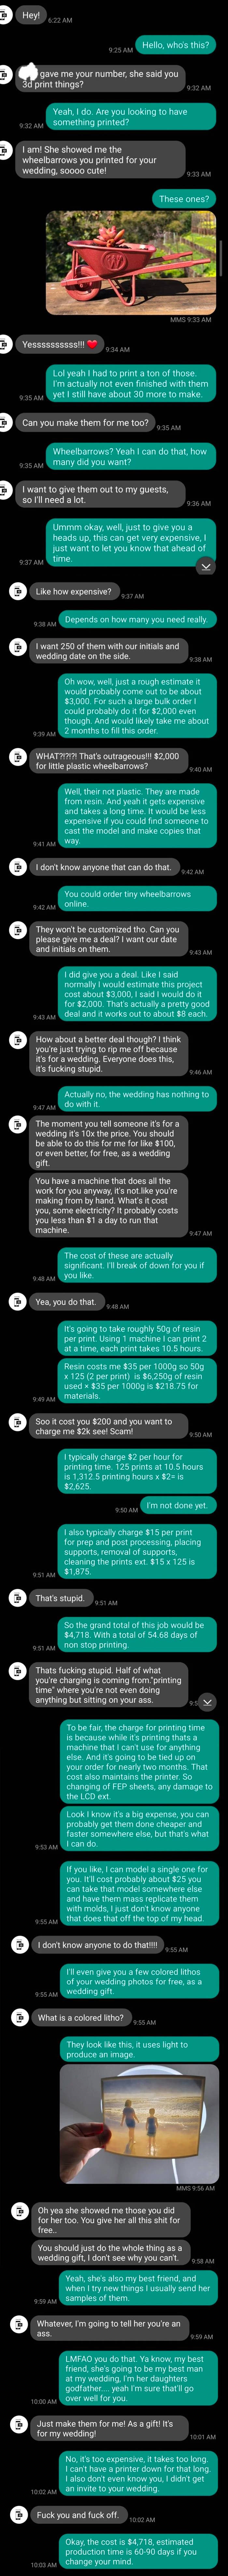 A stranger asks someone for cheap or free 3D printed products and gets rude when they're denied